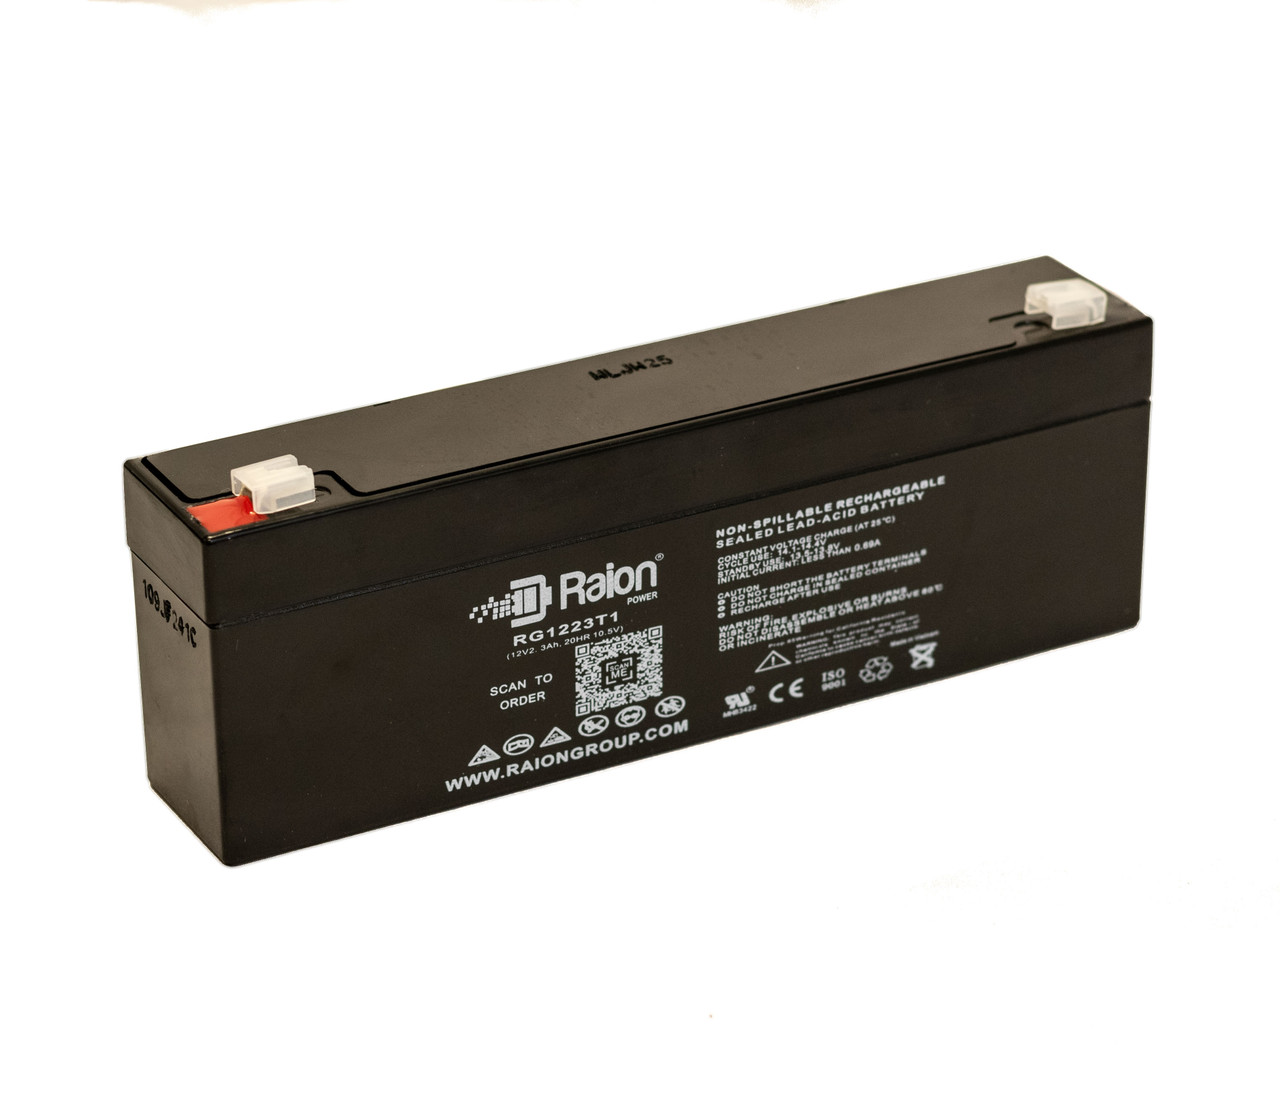 Raion Power RG1223T1 Replacement Battery for Celltech CT2.3-12